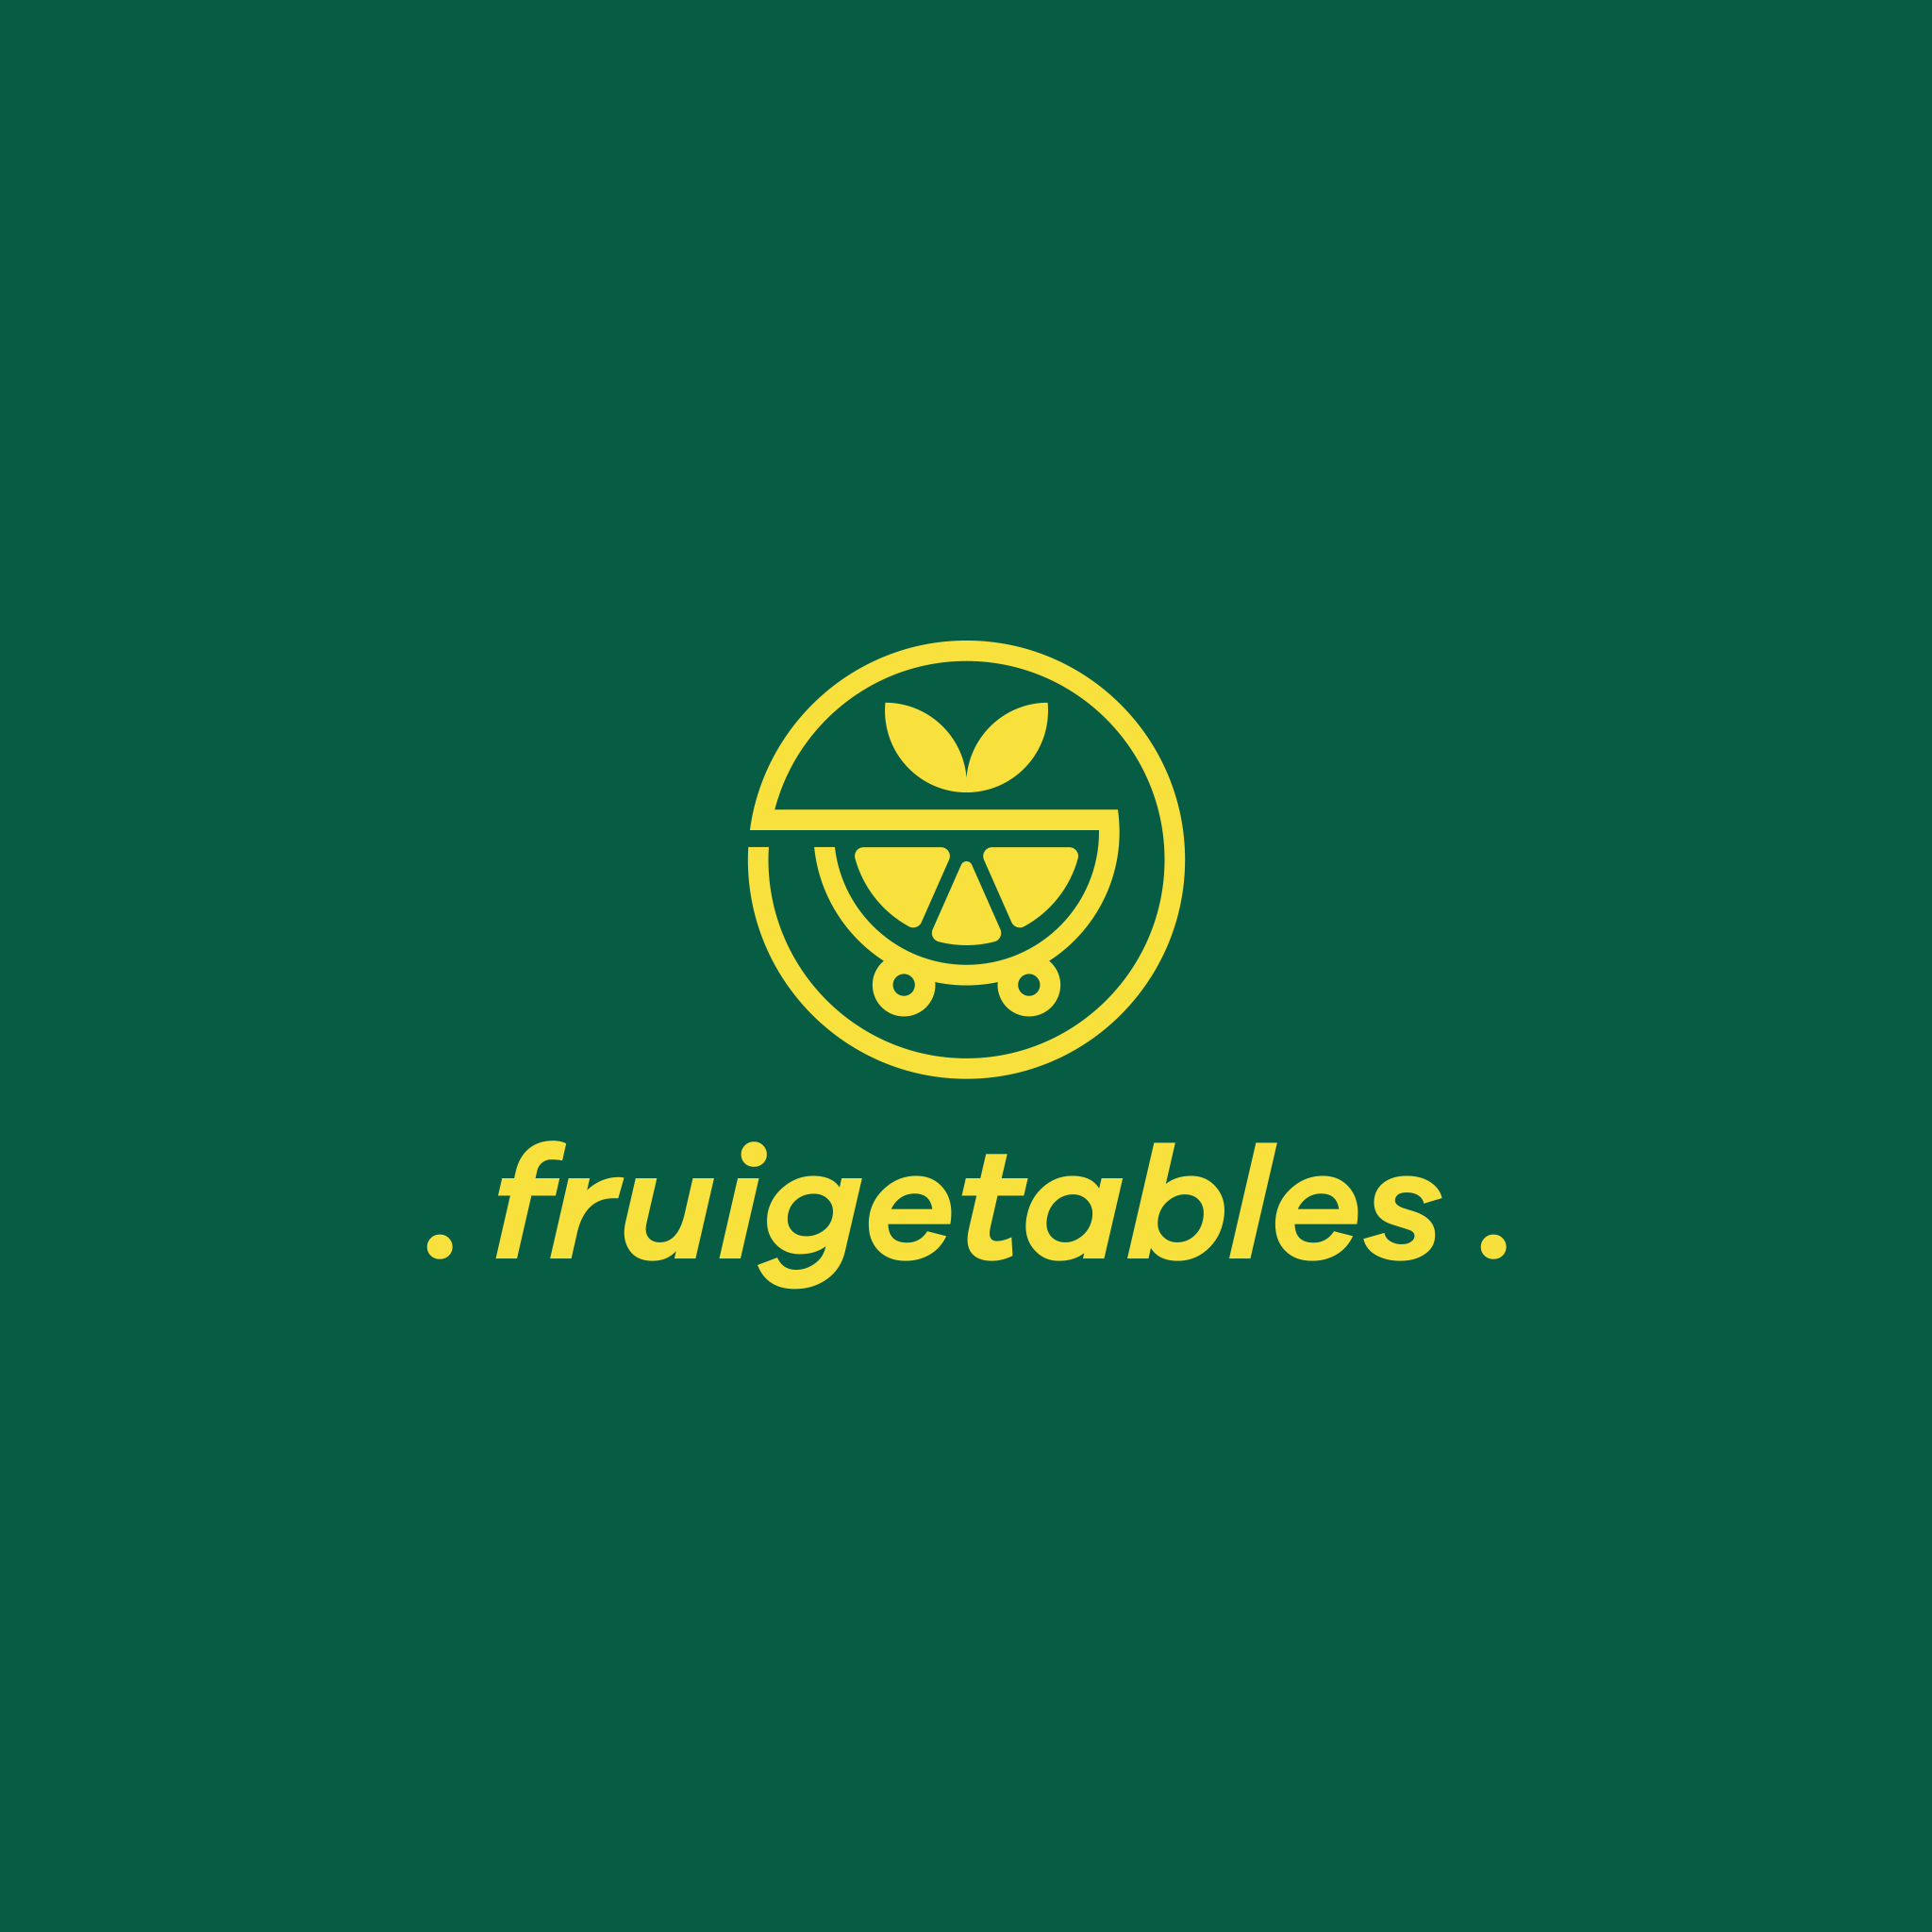 an ecommerce platform logo which got marketing services for ecommerce growth including green background with the word fruigetables in a yellow color